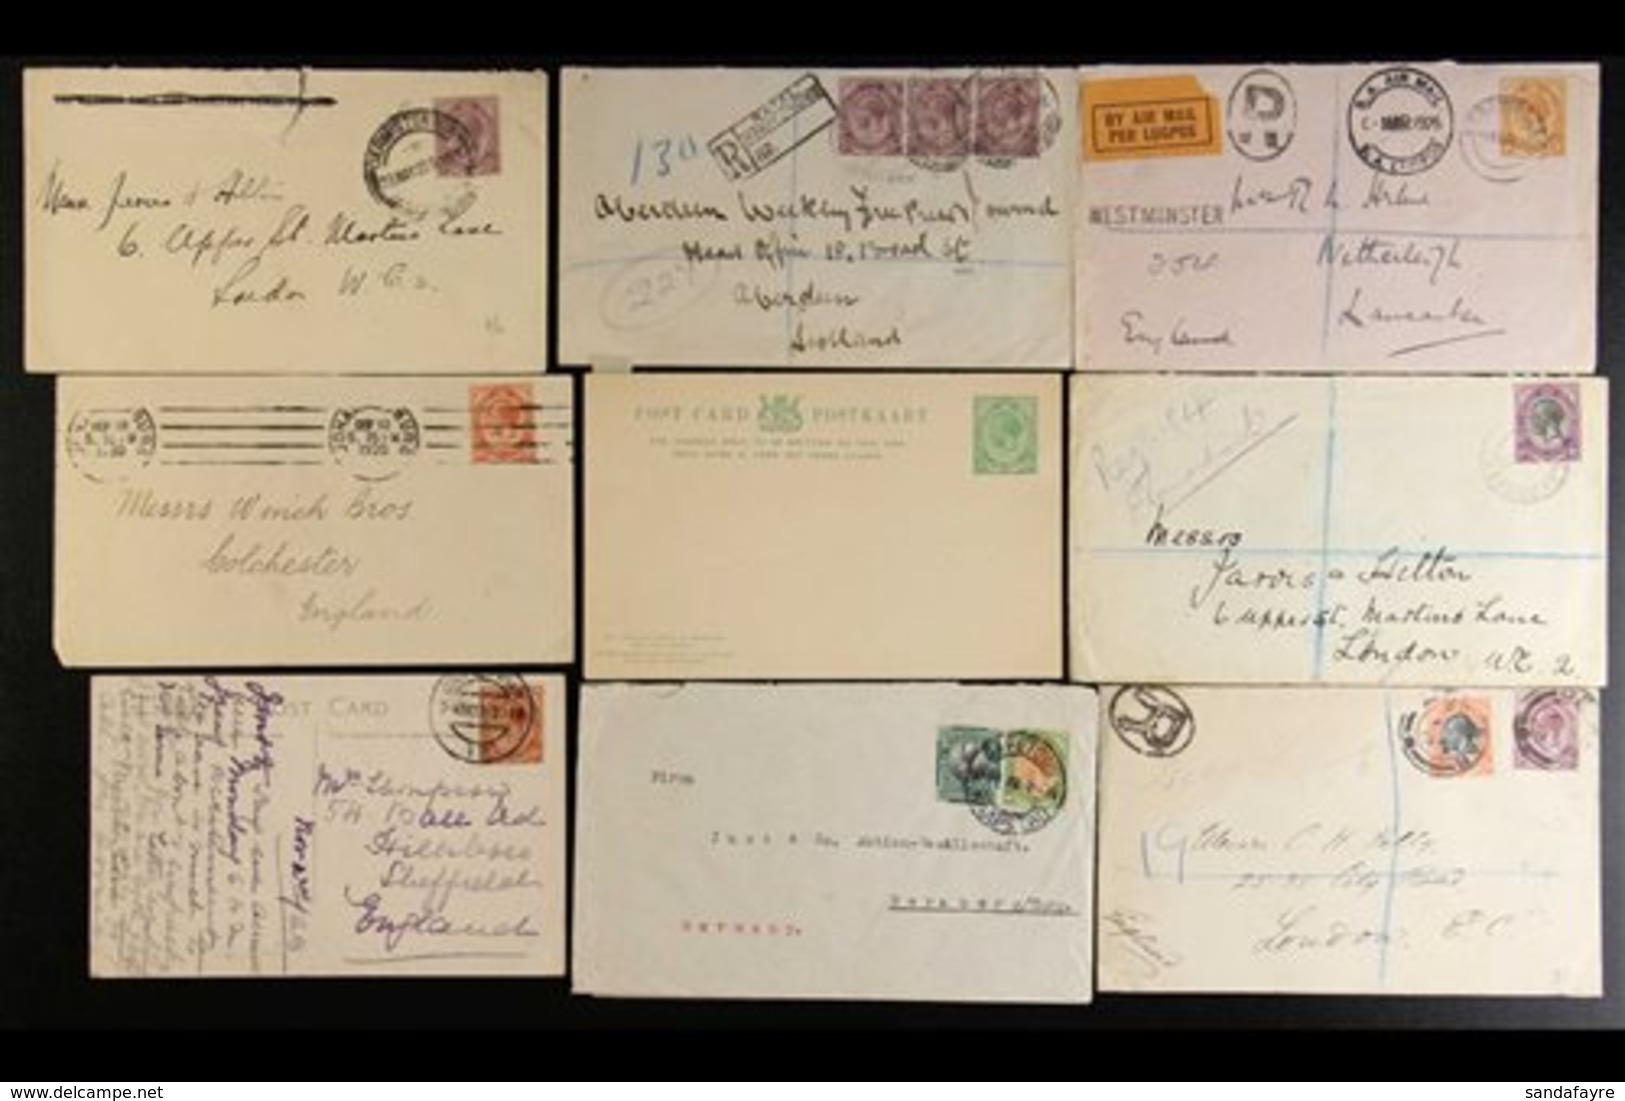 \Y 1913 - 25 "HEADS" COVER GROUP\Y Attractive Group Of Covers And Cards Franked With Values To 1s, Including Flown And R - Non Classés